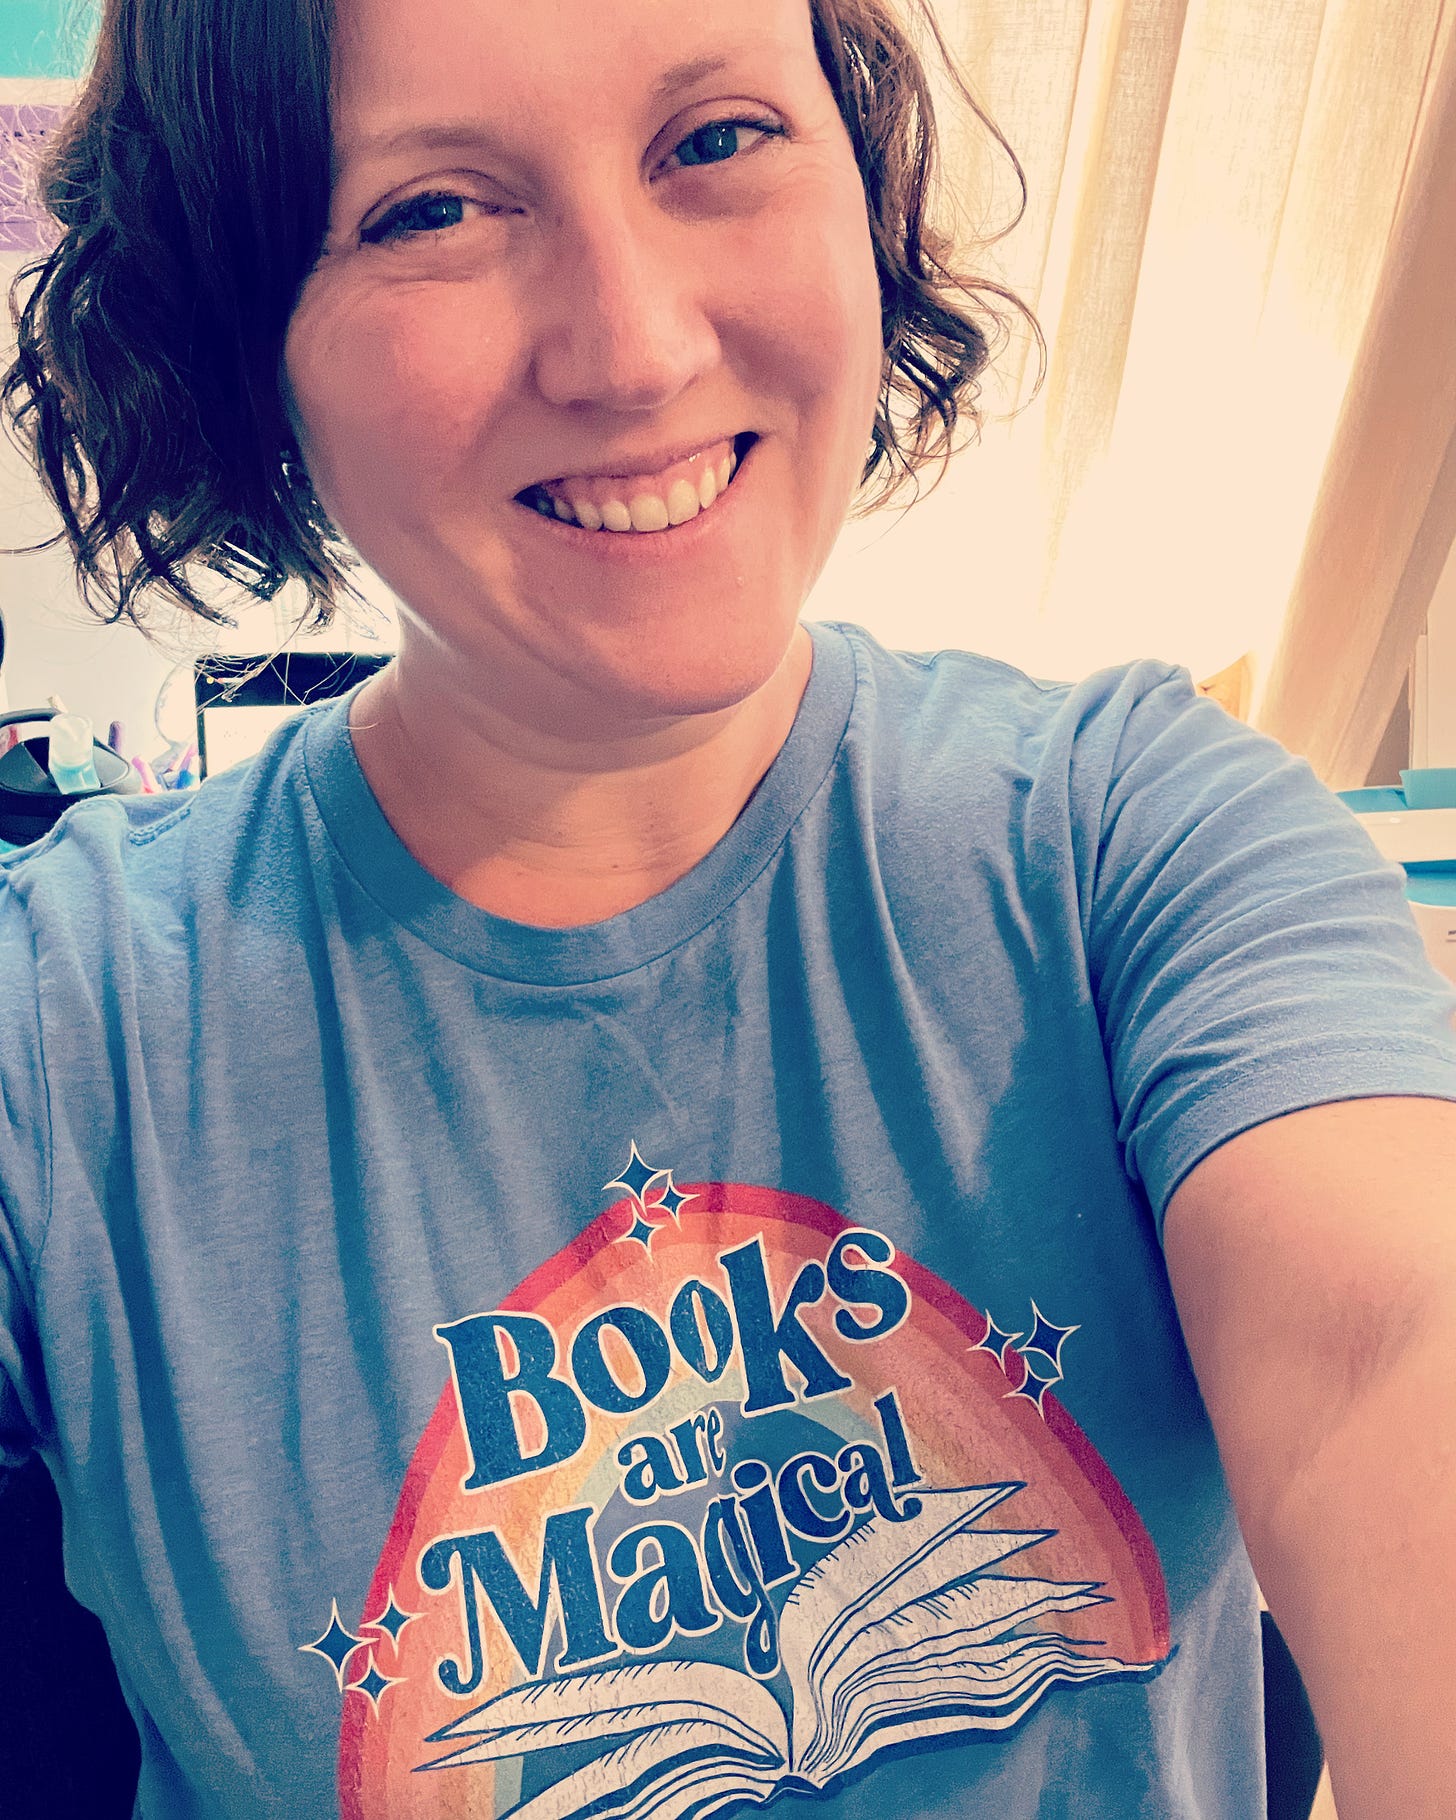 Me wearing a "Books are Magical" shirt, smiling proudly